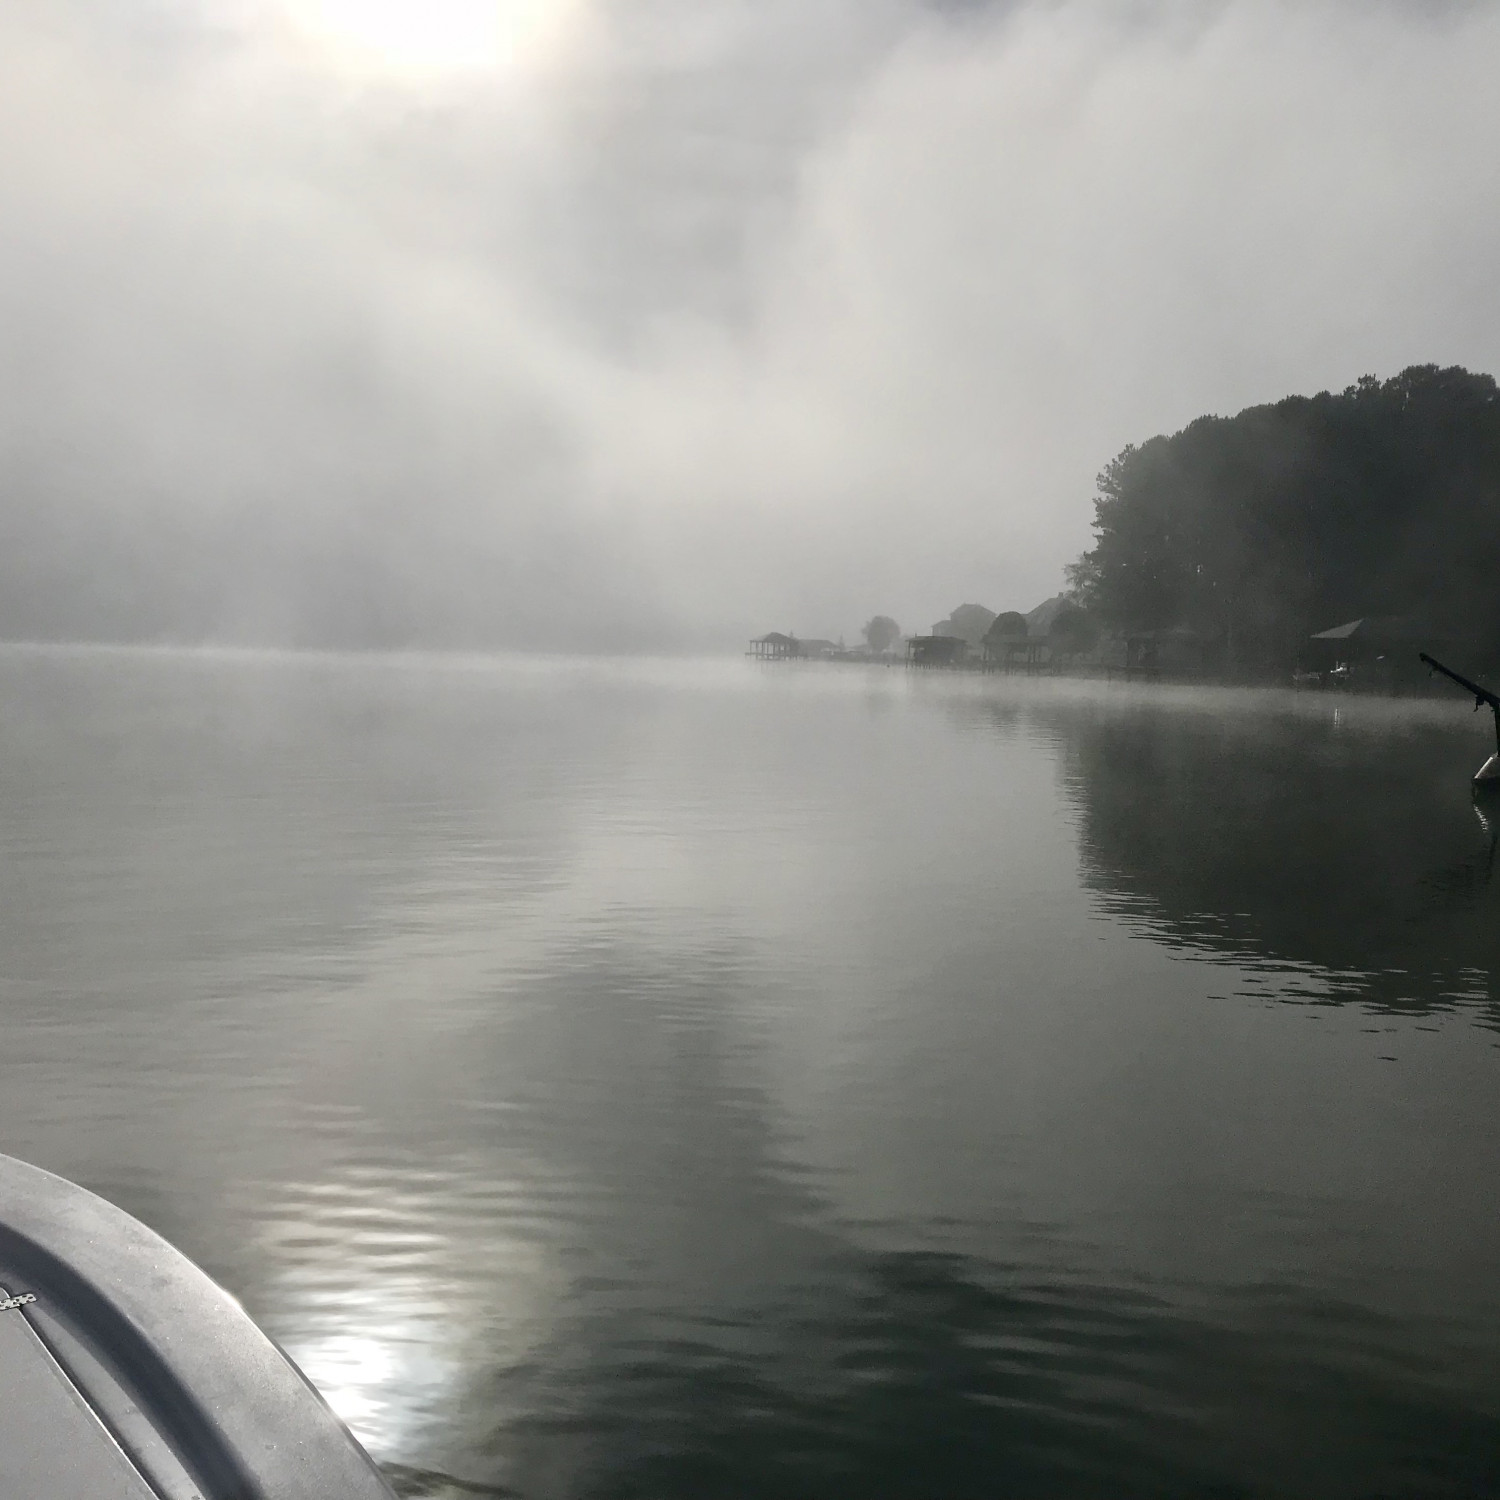 Taken early one morning on Tellico Lake as we were heading out on our first fishing trip in the...